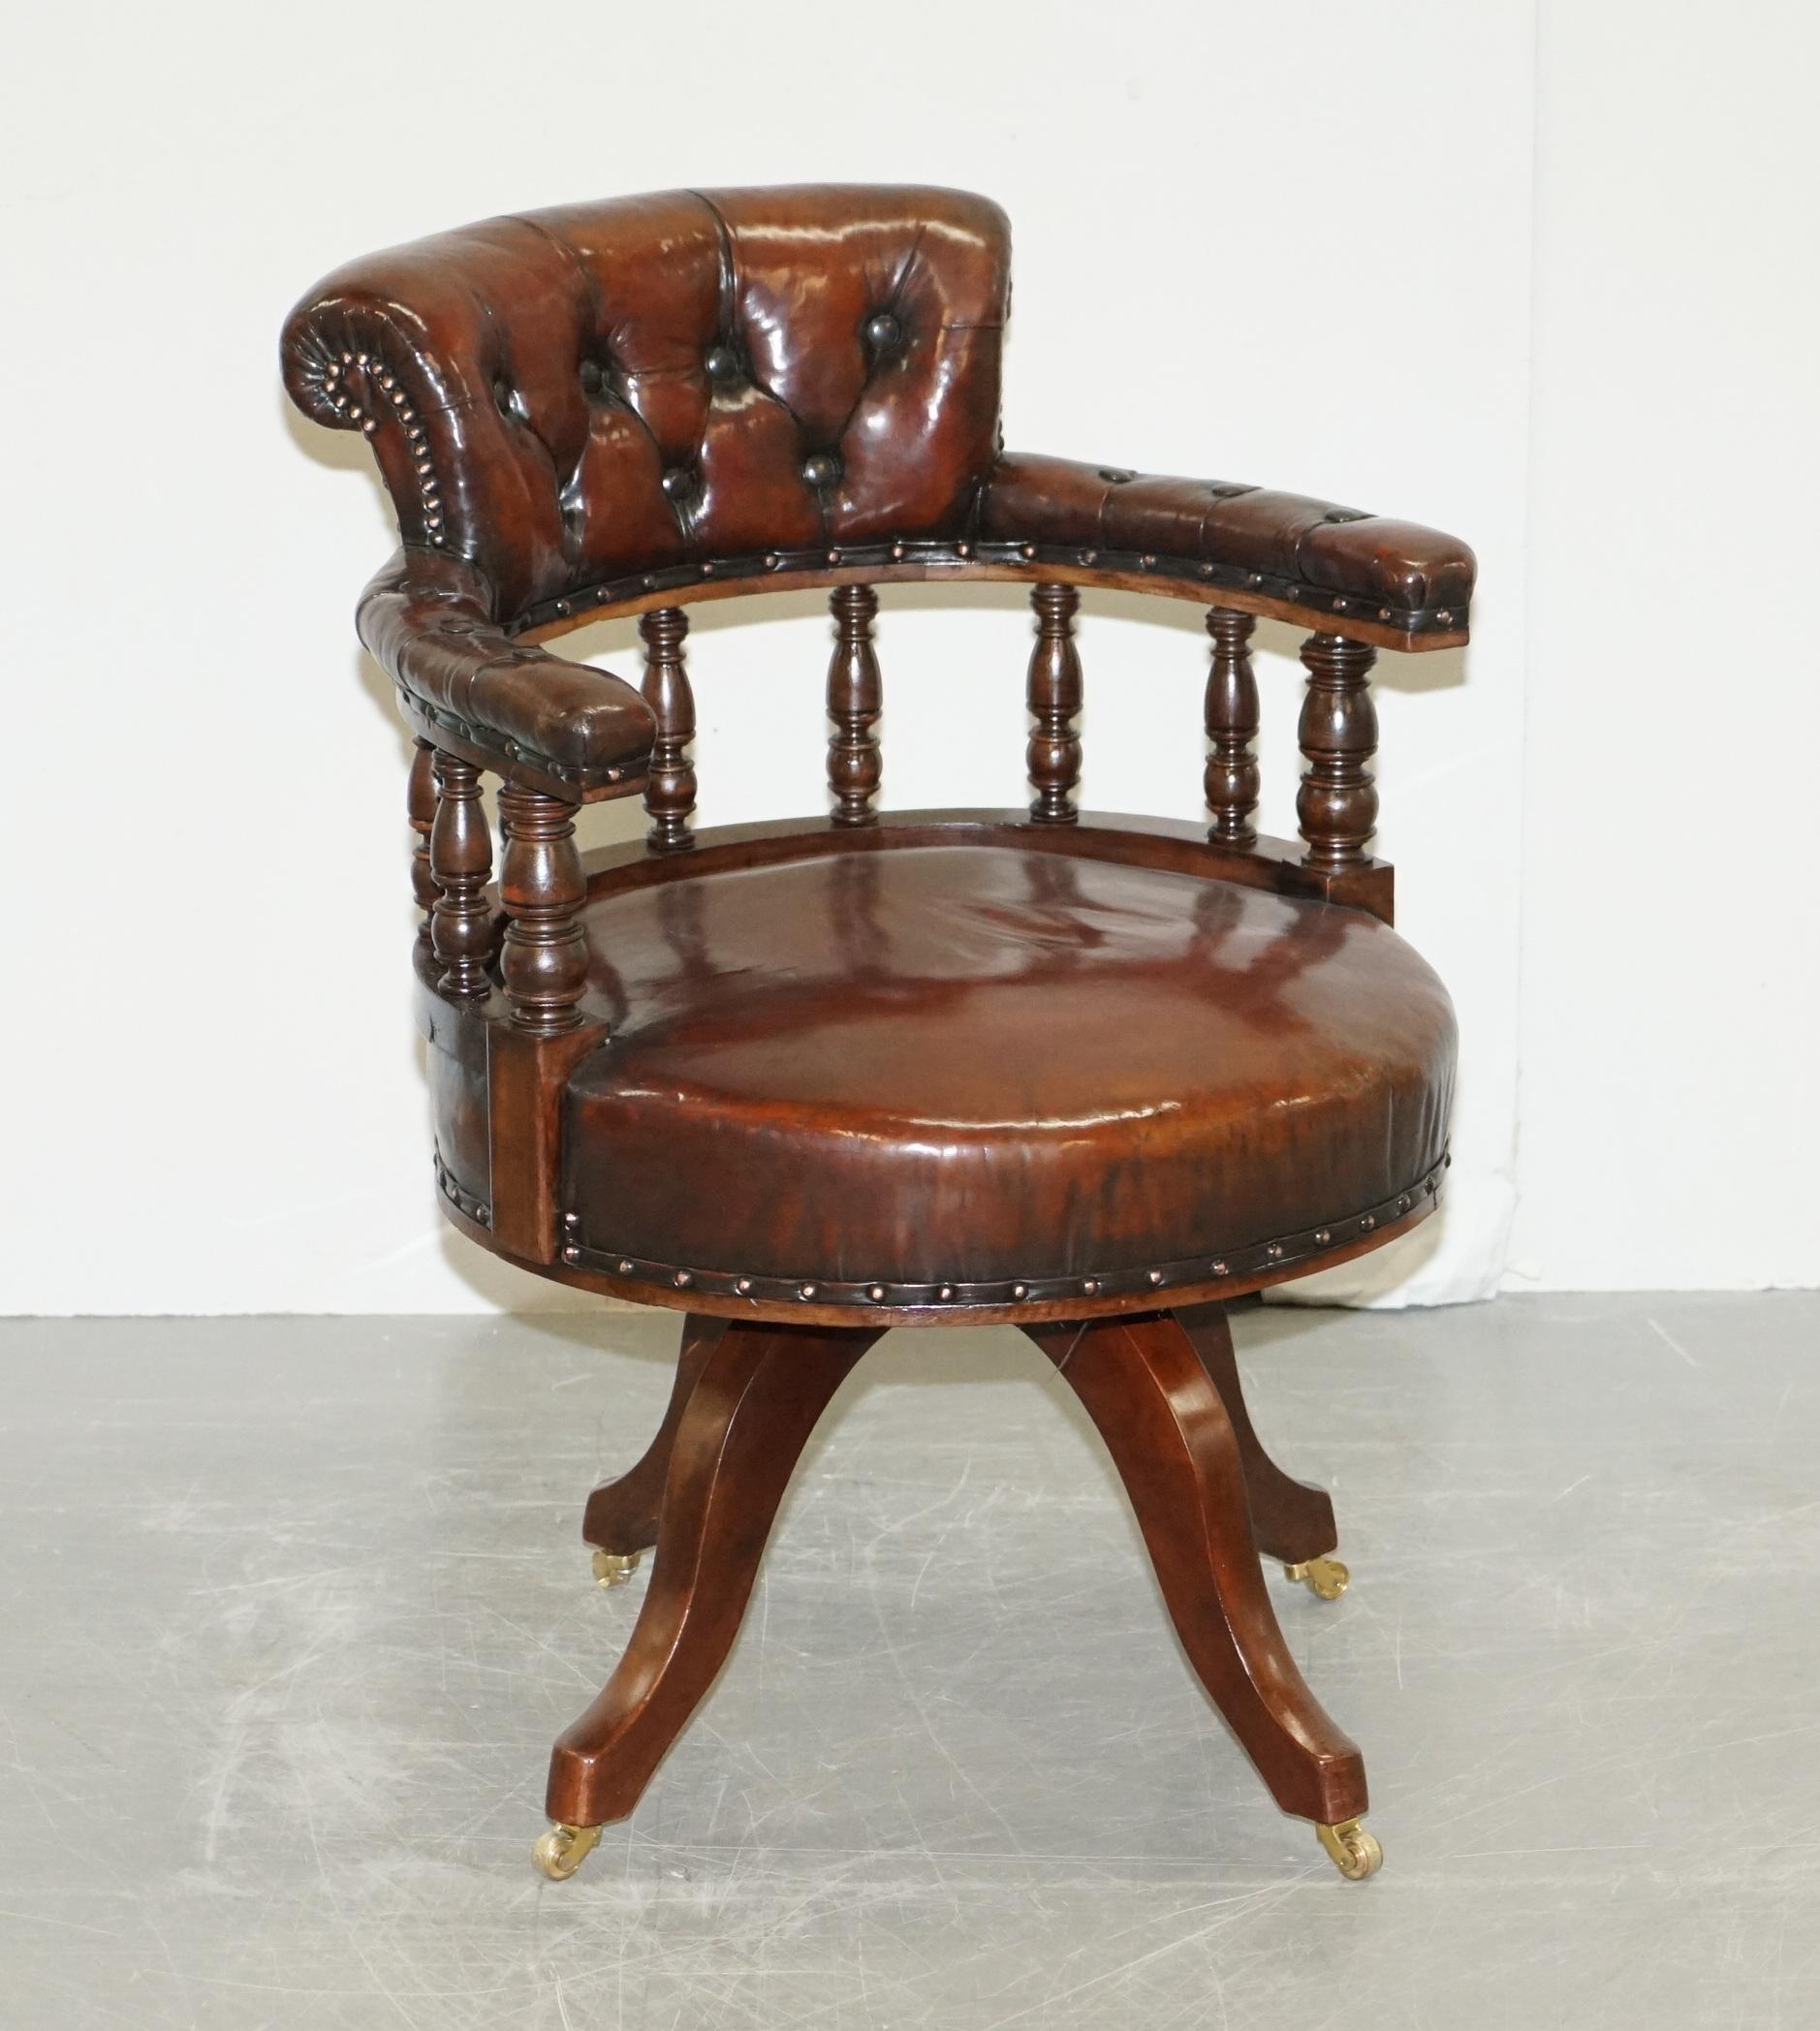 We are delighted to offer for sale this rare fully restored circa 1860 Barrell back Chesterfield hand dyed brown leather office chair

This chair is really quite exquisite, its one of the earliest types of swivel chairs I have ever seen, the frame